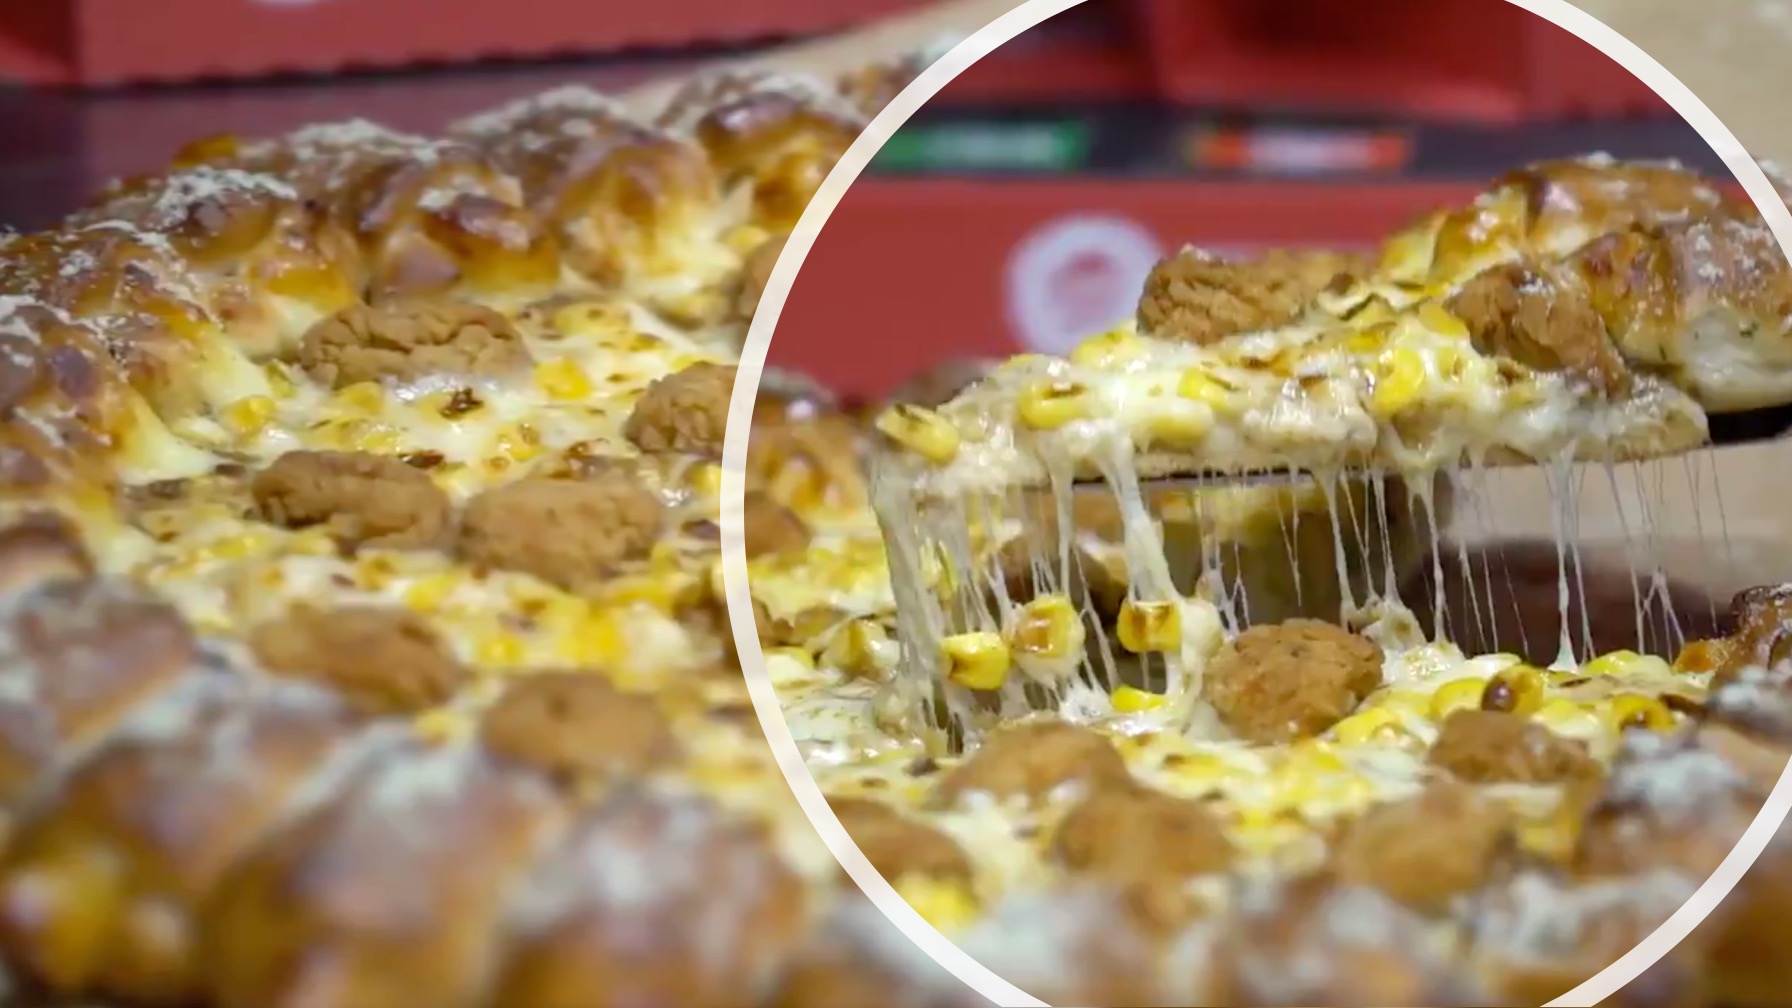 KFC and Pizza Hut Unite to Create Gravy-Filled Pizza [WATCH]